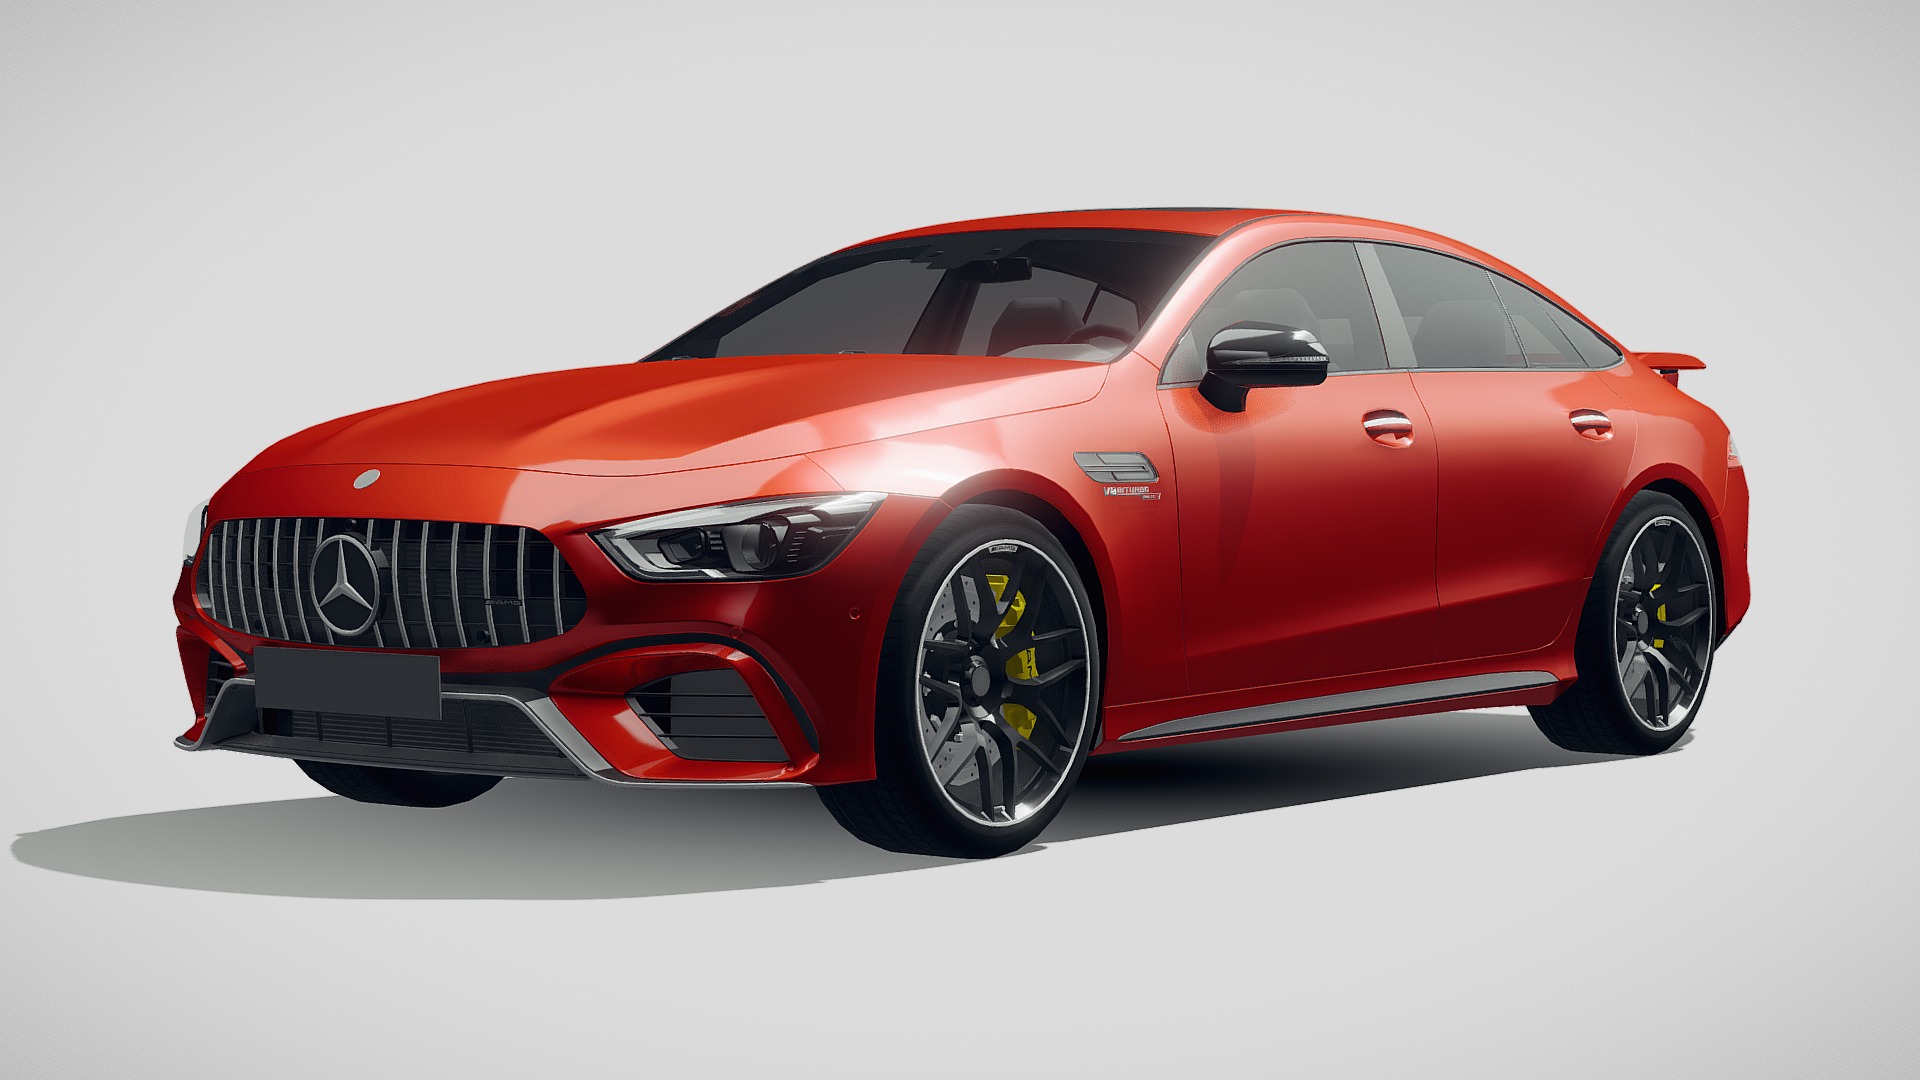 3D model LowPoly Mercedes AMG GT63 2019 - This is a 3D model of the LowPoly Mercedes AMG GT63 2019. The 3D model is about a red sports car.